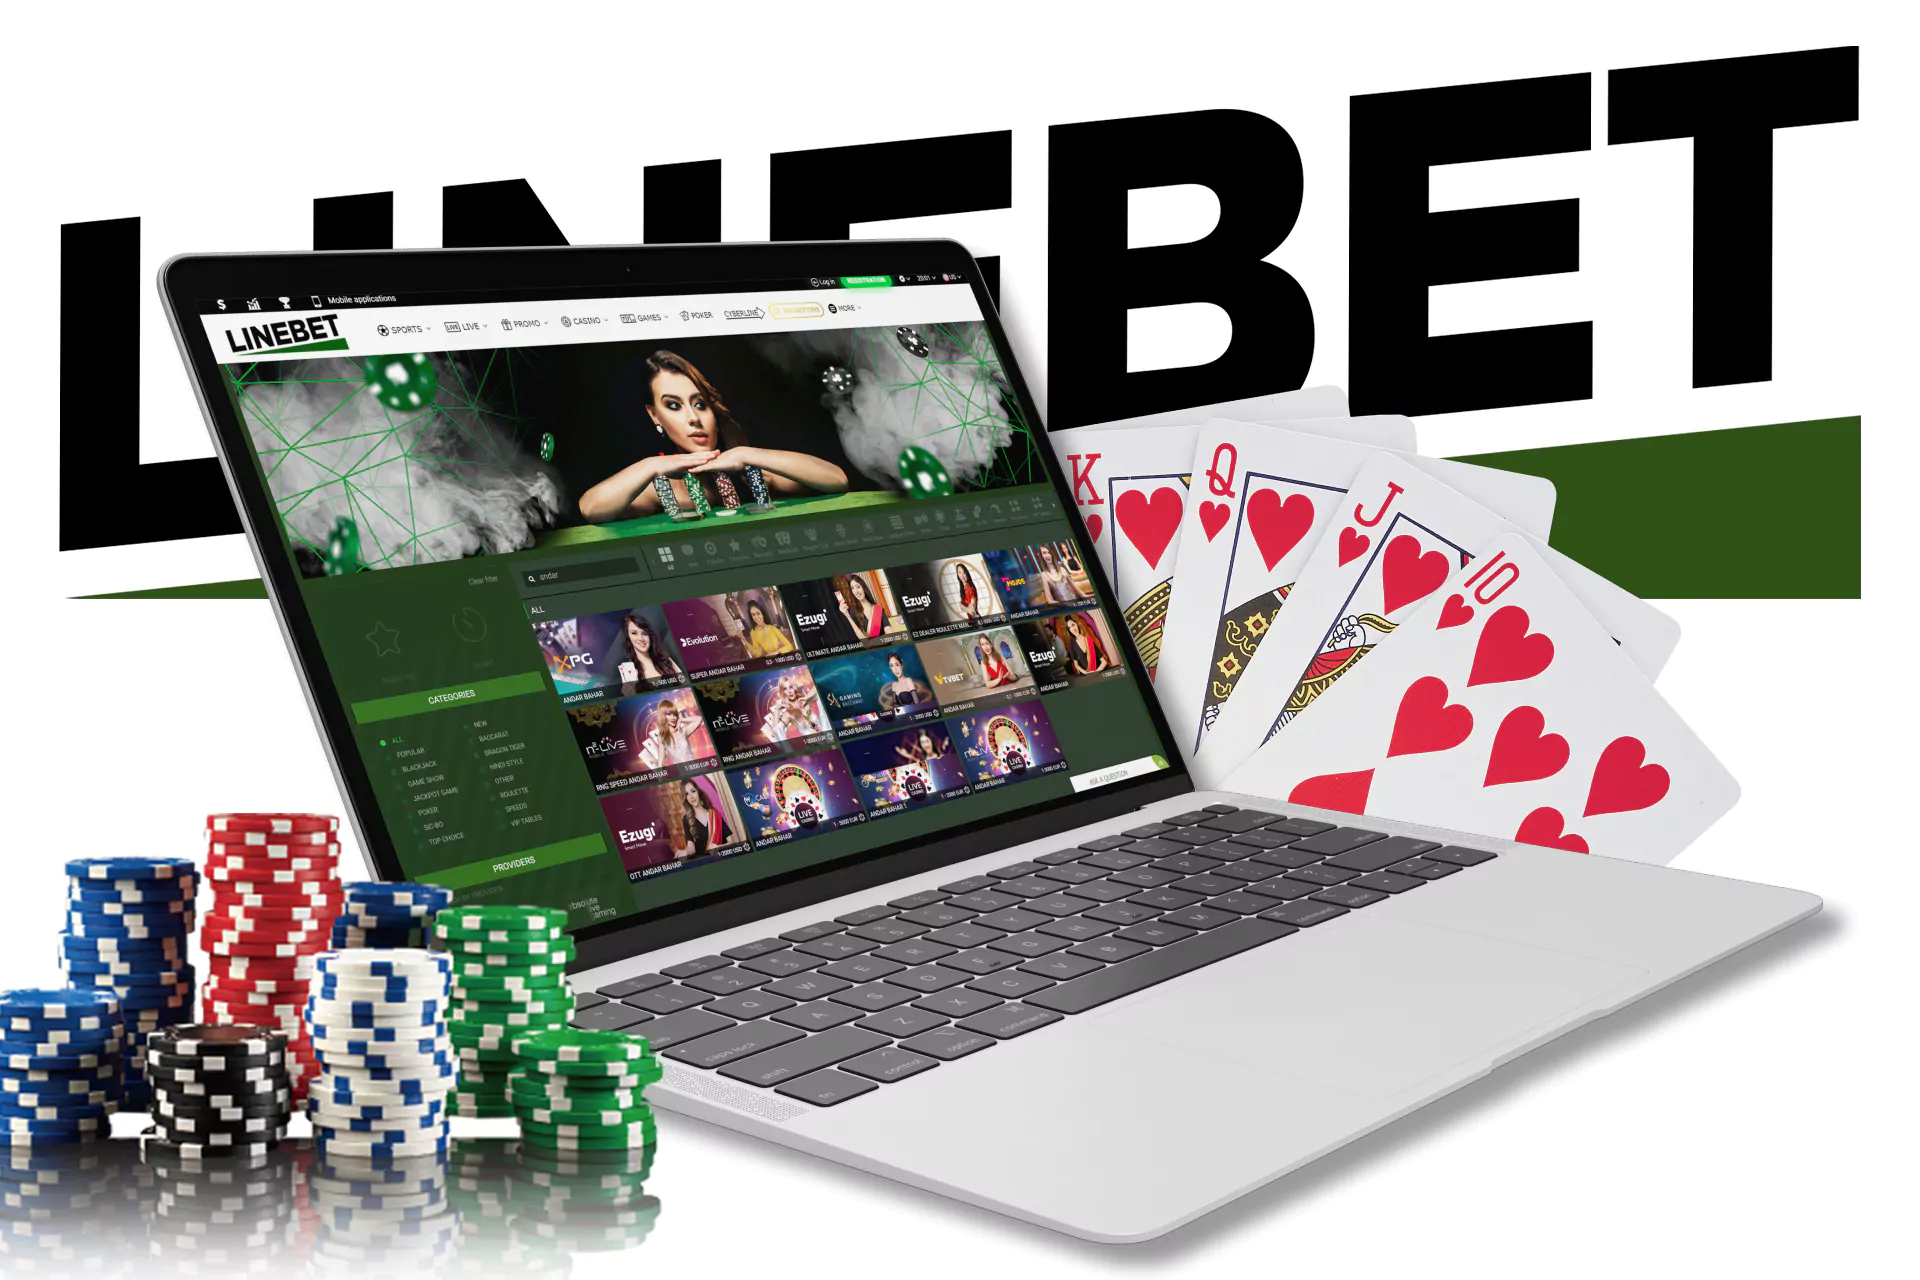 Learn more about the Andar Bahar game and place your bets on Linebet.